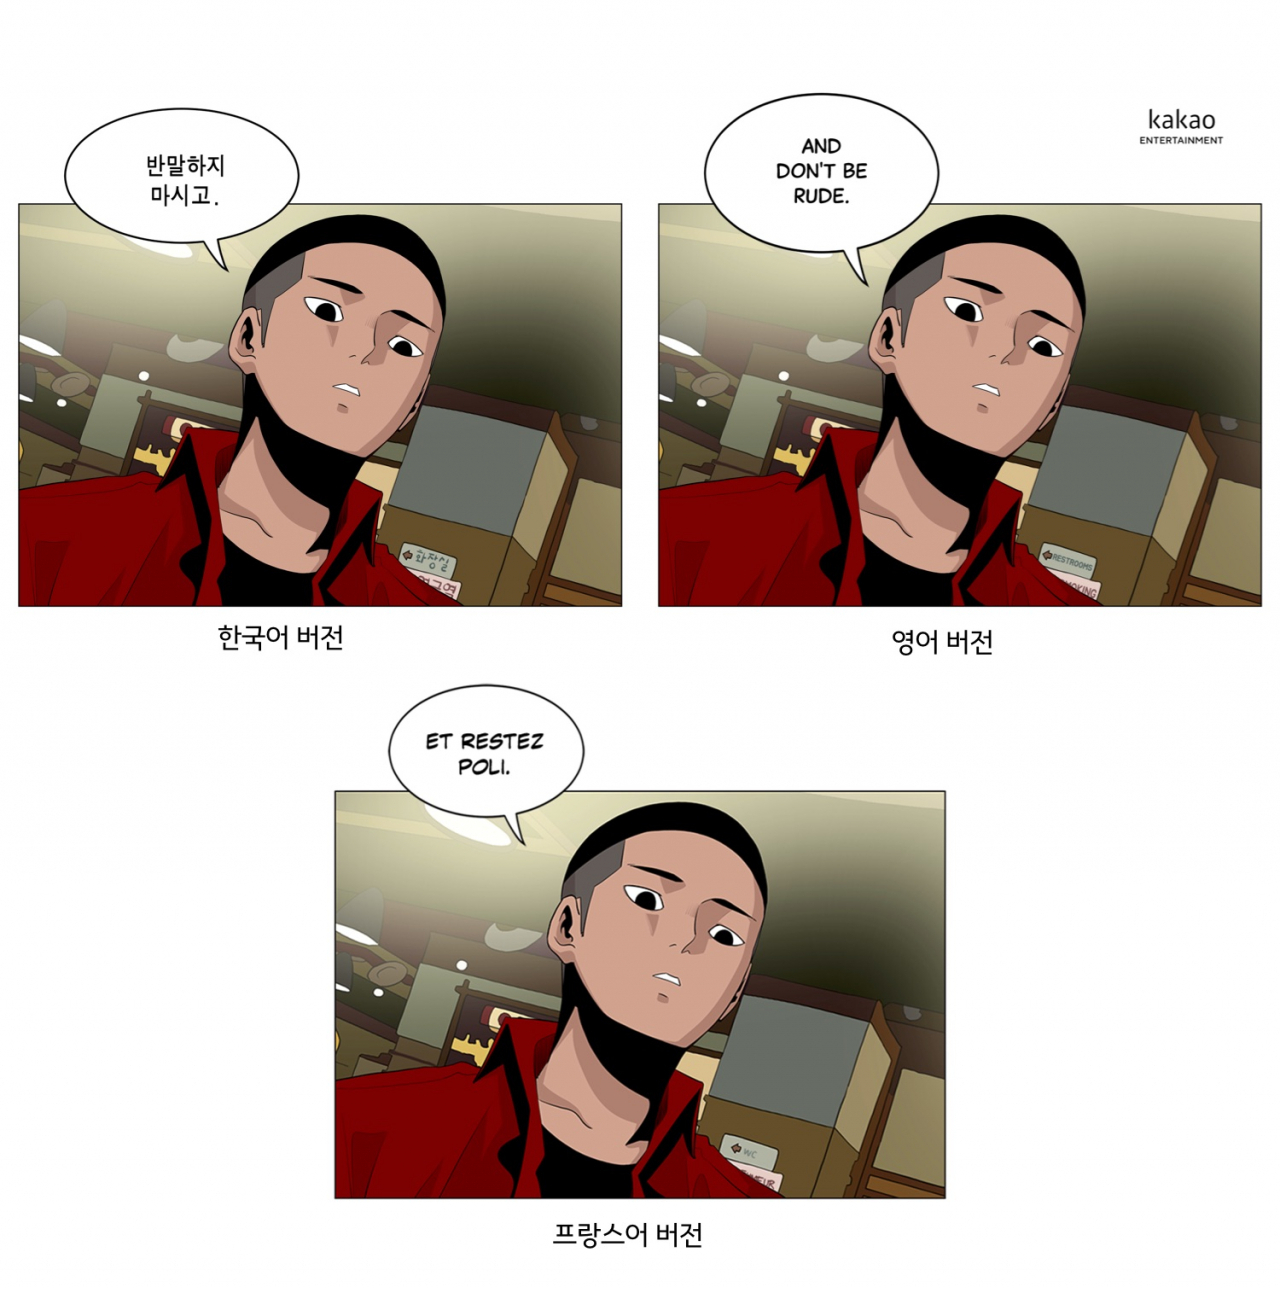 Korean Webtoons A panel from “Itaewon Class” is presented in three different languages with nuanced differences in the phrases used. (Kakao Entertainment)